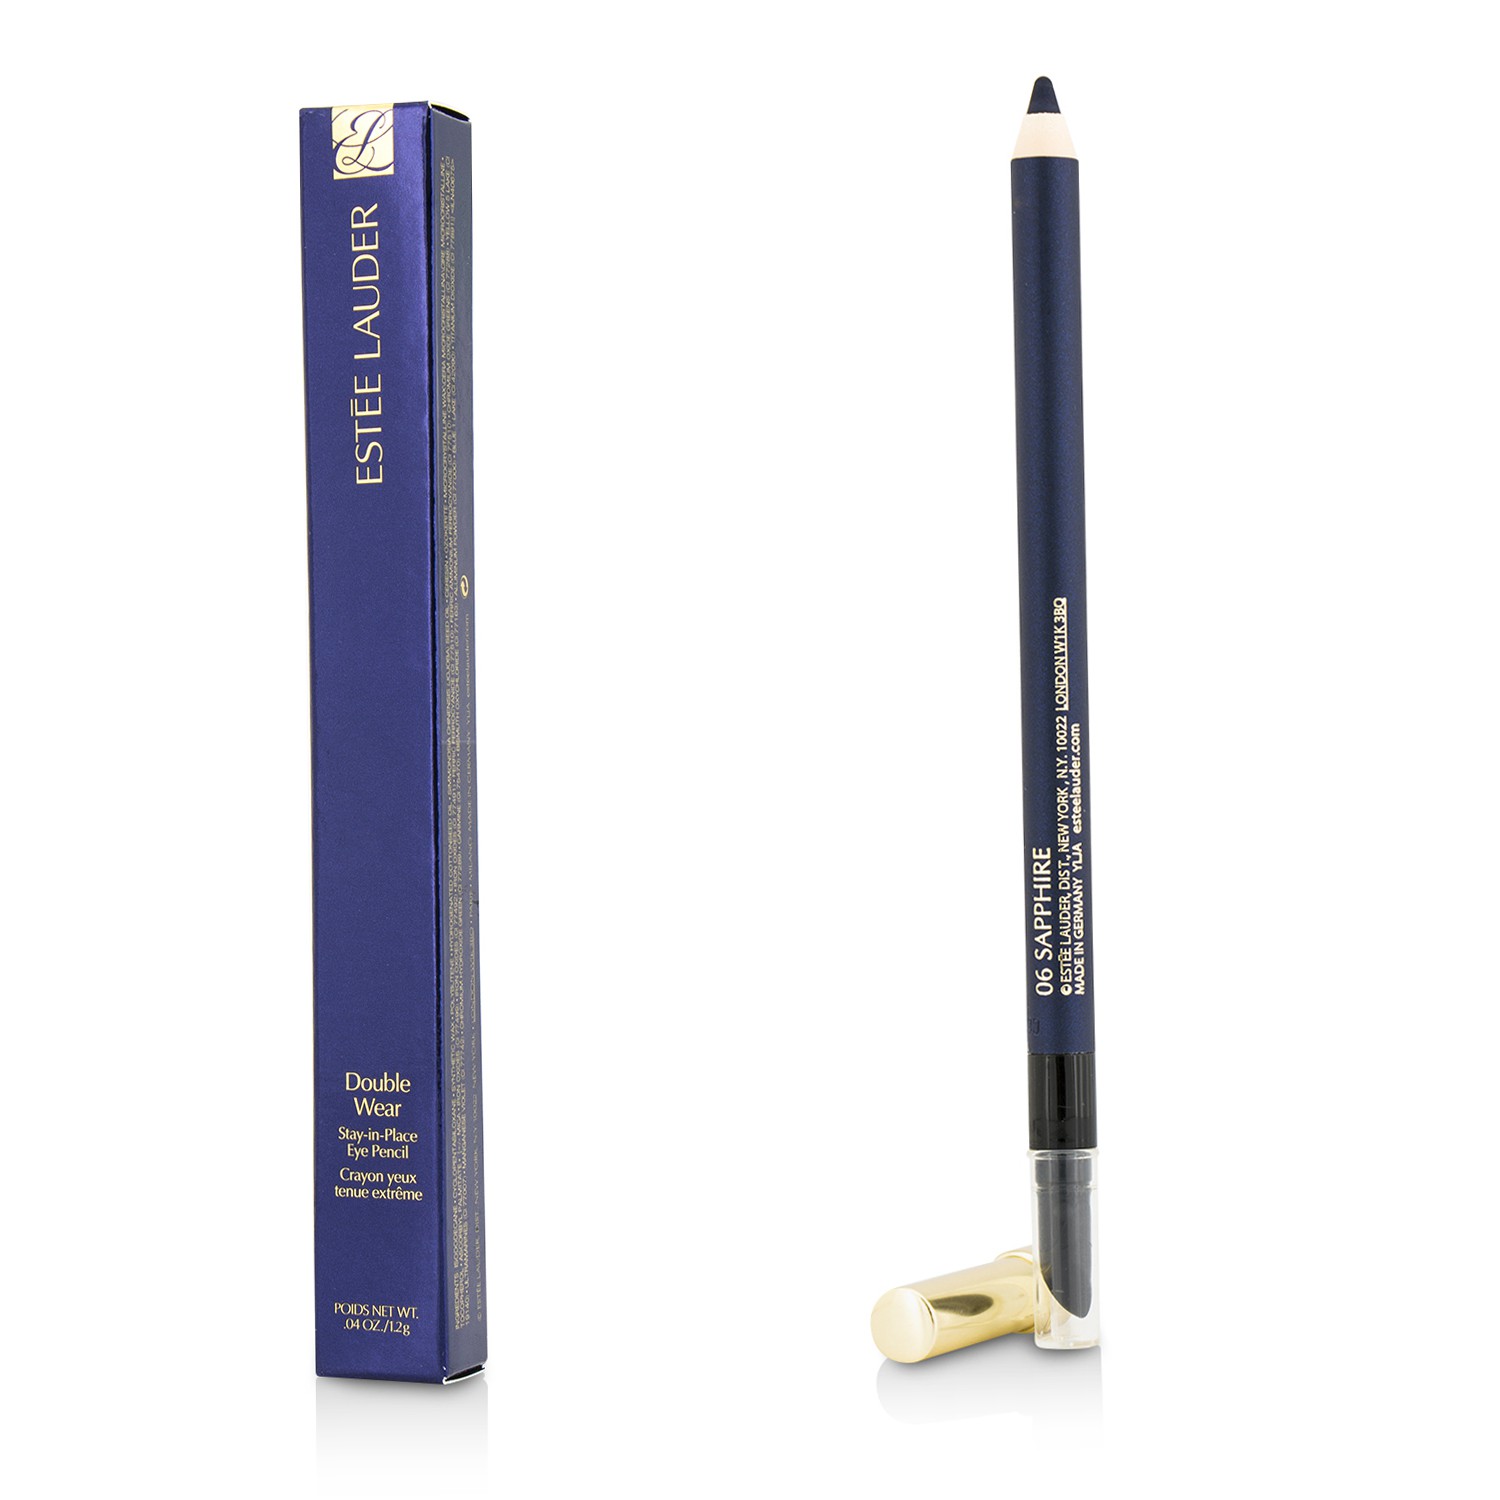 Double Wear Stay In Place Eye Pencil (New Packaging) - #06 Sapphire Estee Lauder Image